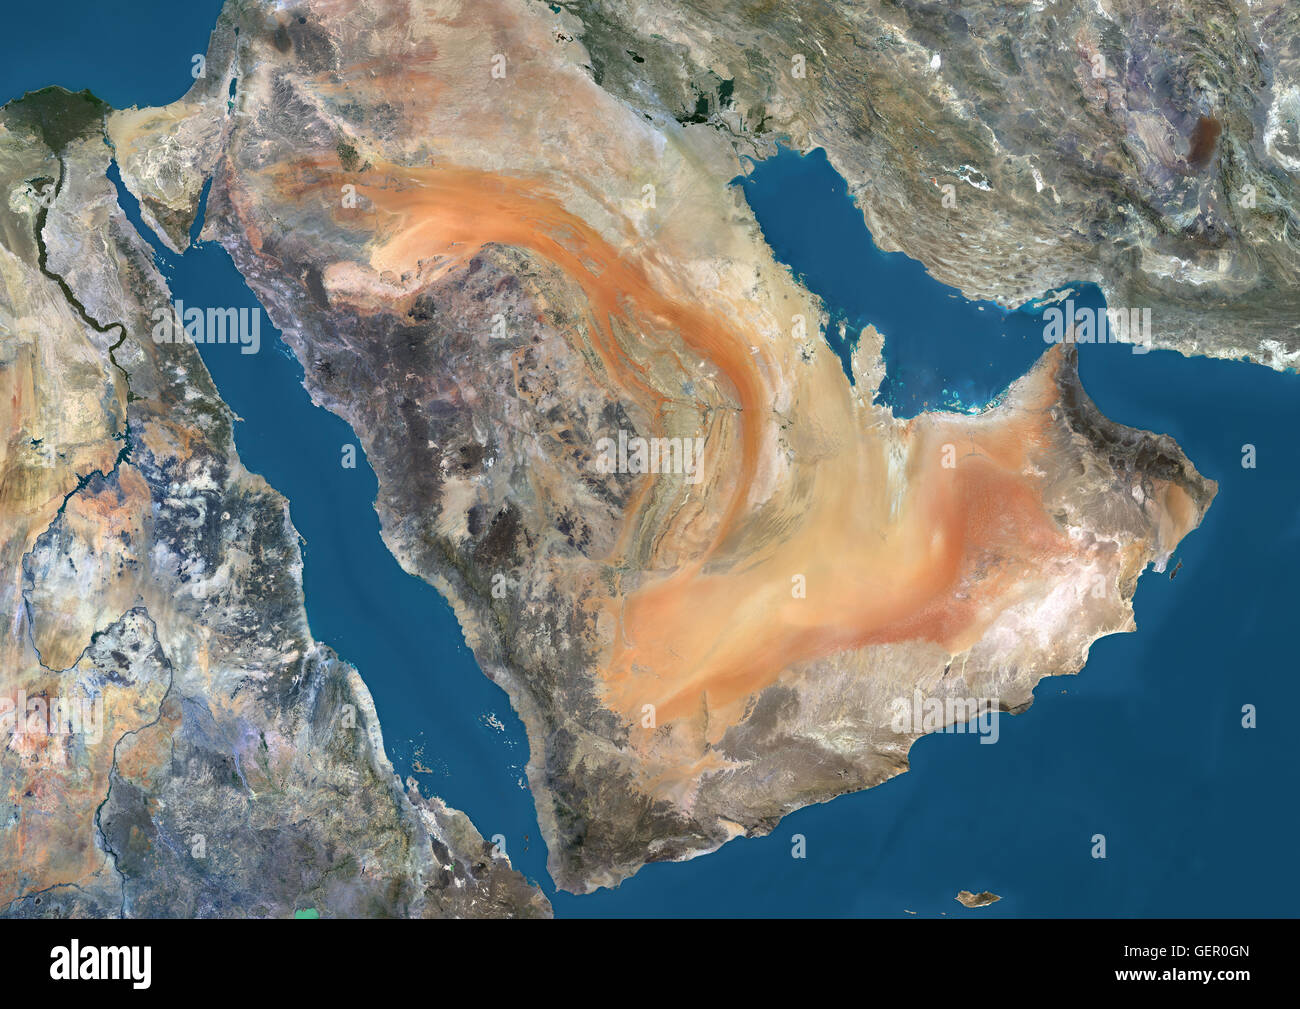 Satellite view of the Arabian Peninsula. This image was compiled from data acquired in 2014 by Landsat 8 satellite. Stock Photo